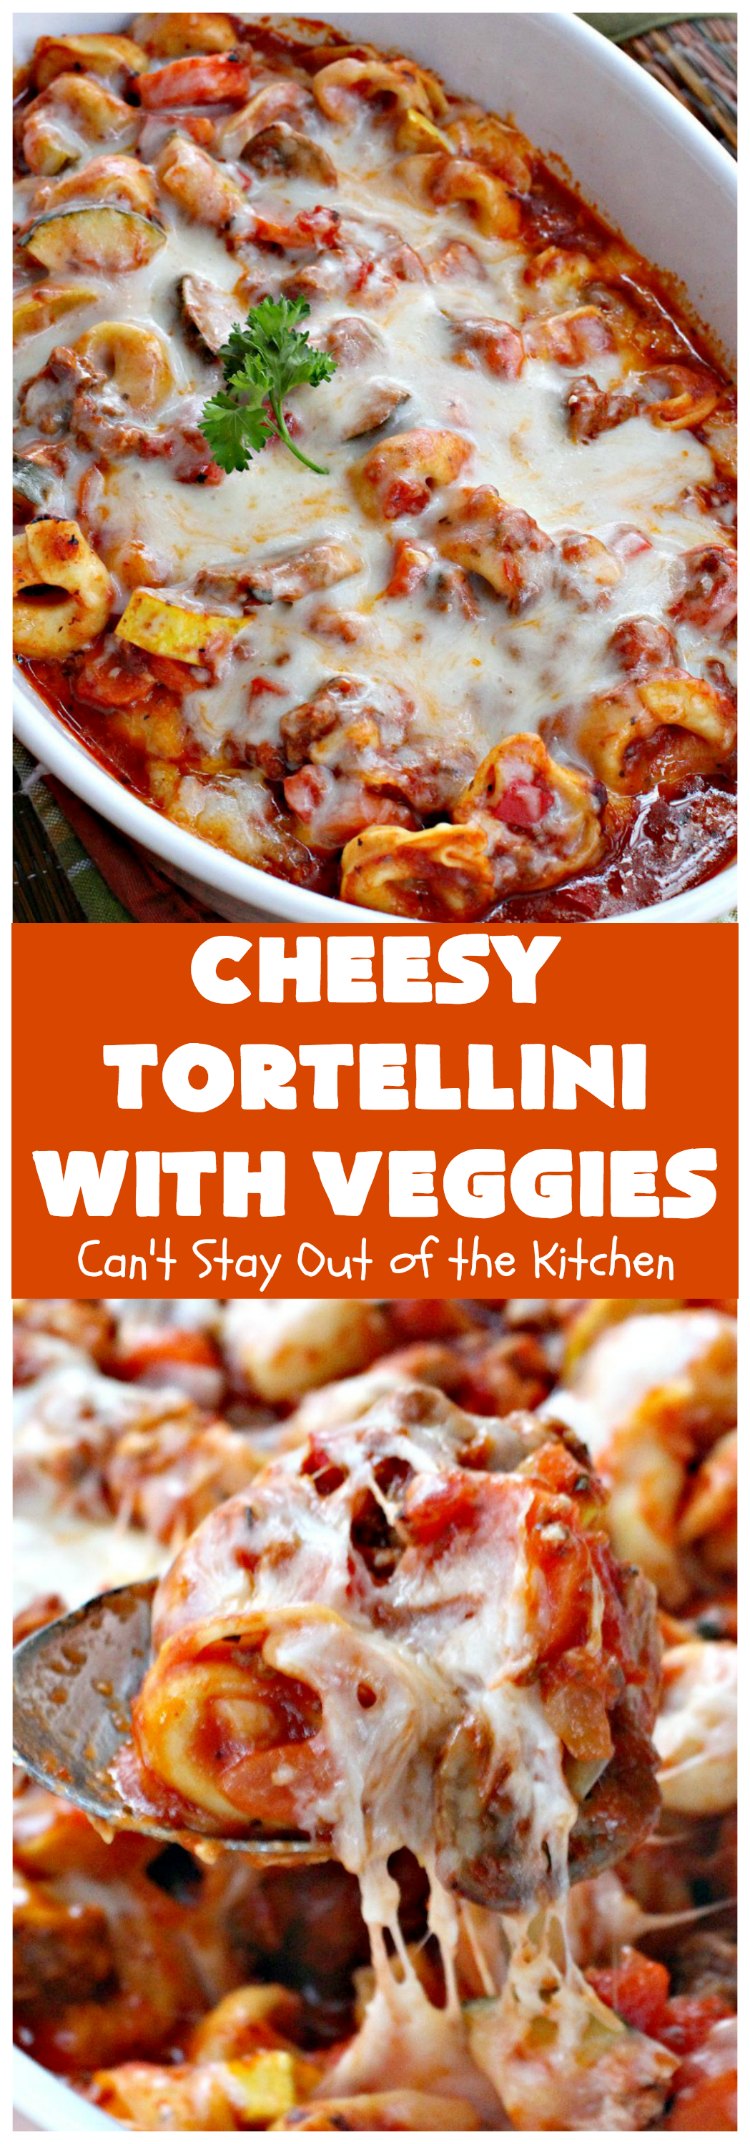 Cheesy Tortellini with Veggies | Can't Stay Out of the Kitchen